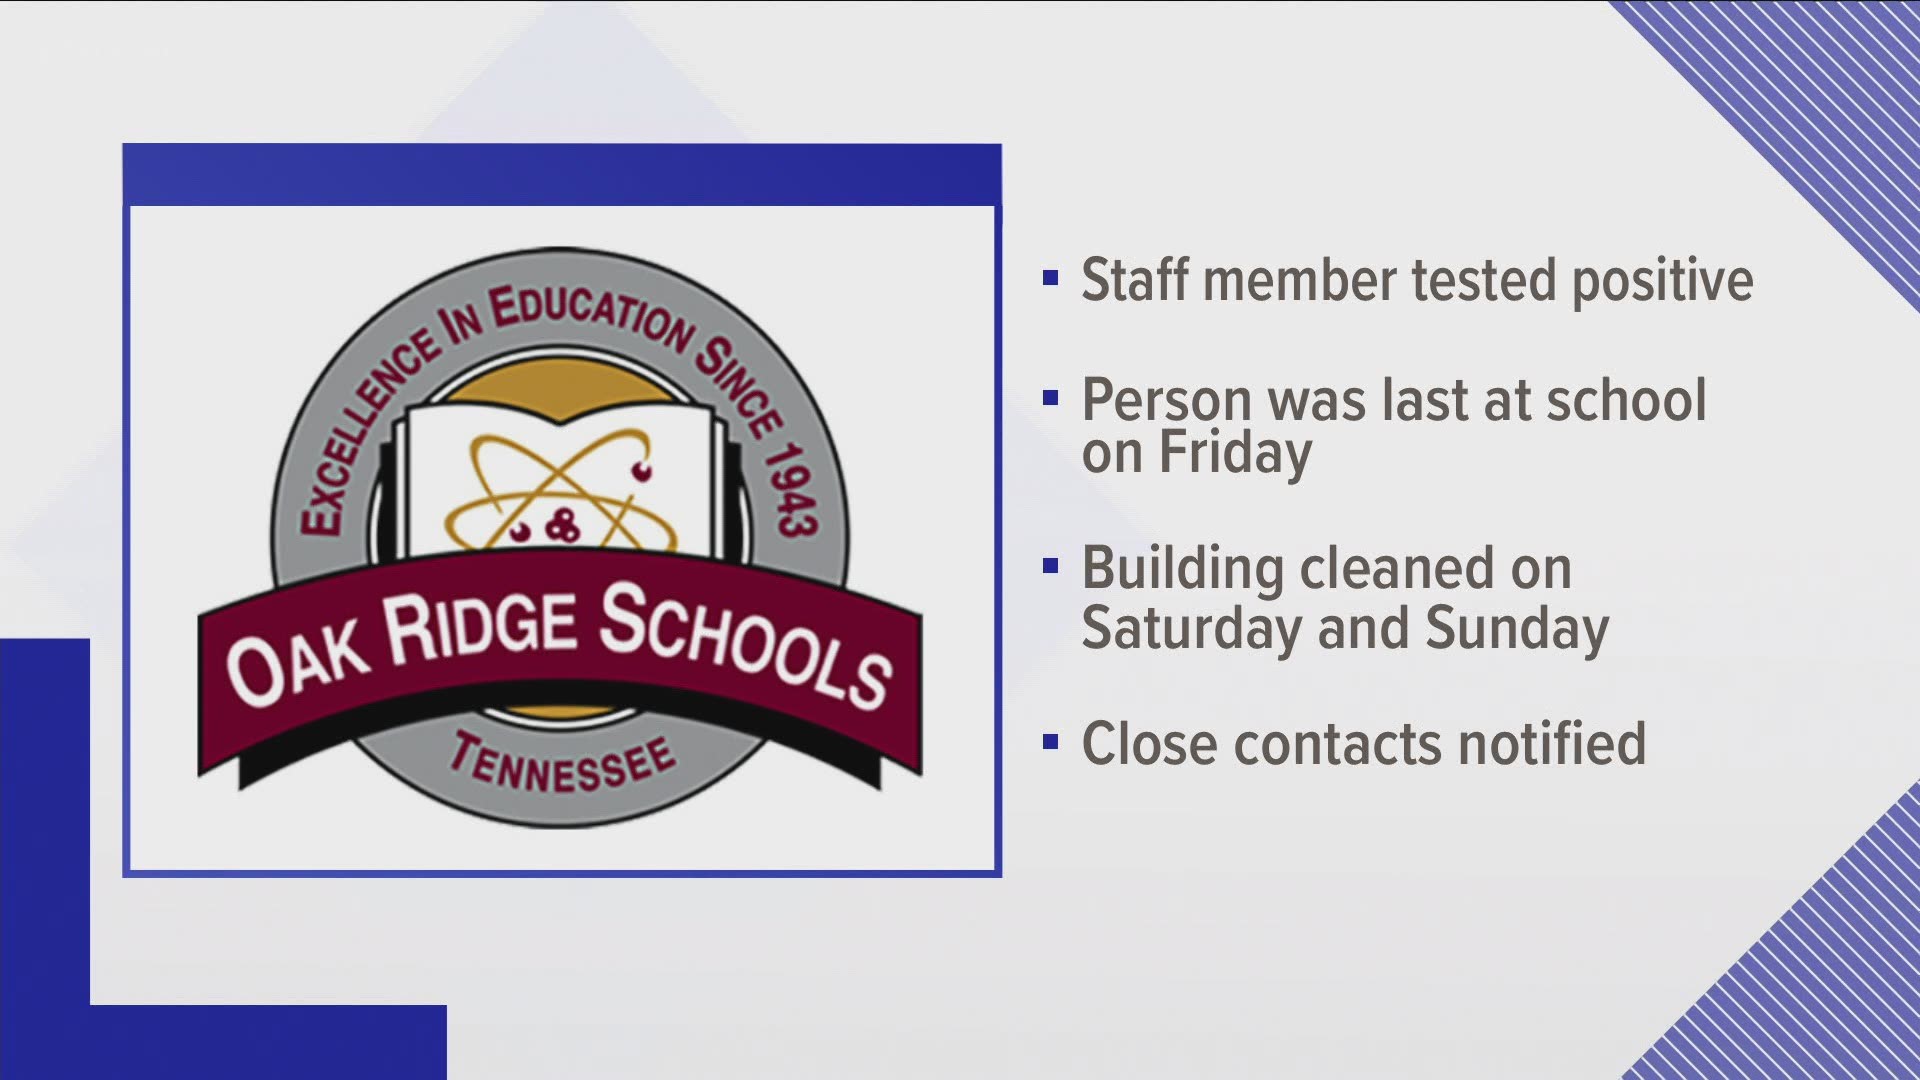 Dr. Borchers said having this report Saturday morning allowed the district to implement a 24-hour closure so it could thoroughly disinfect the building on Saturday.